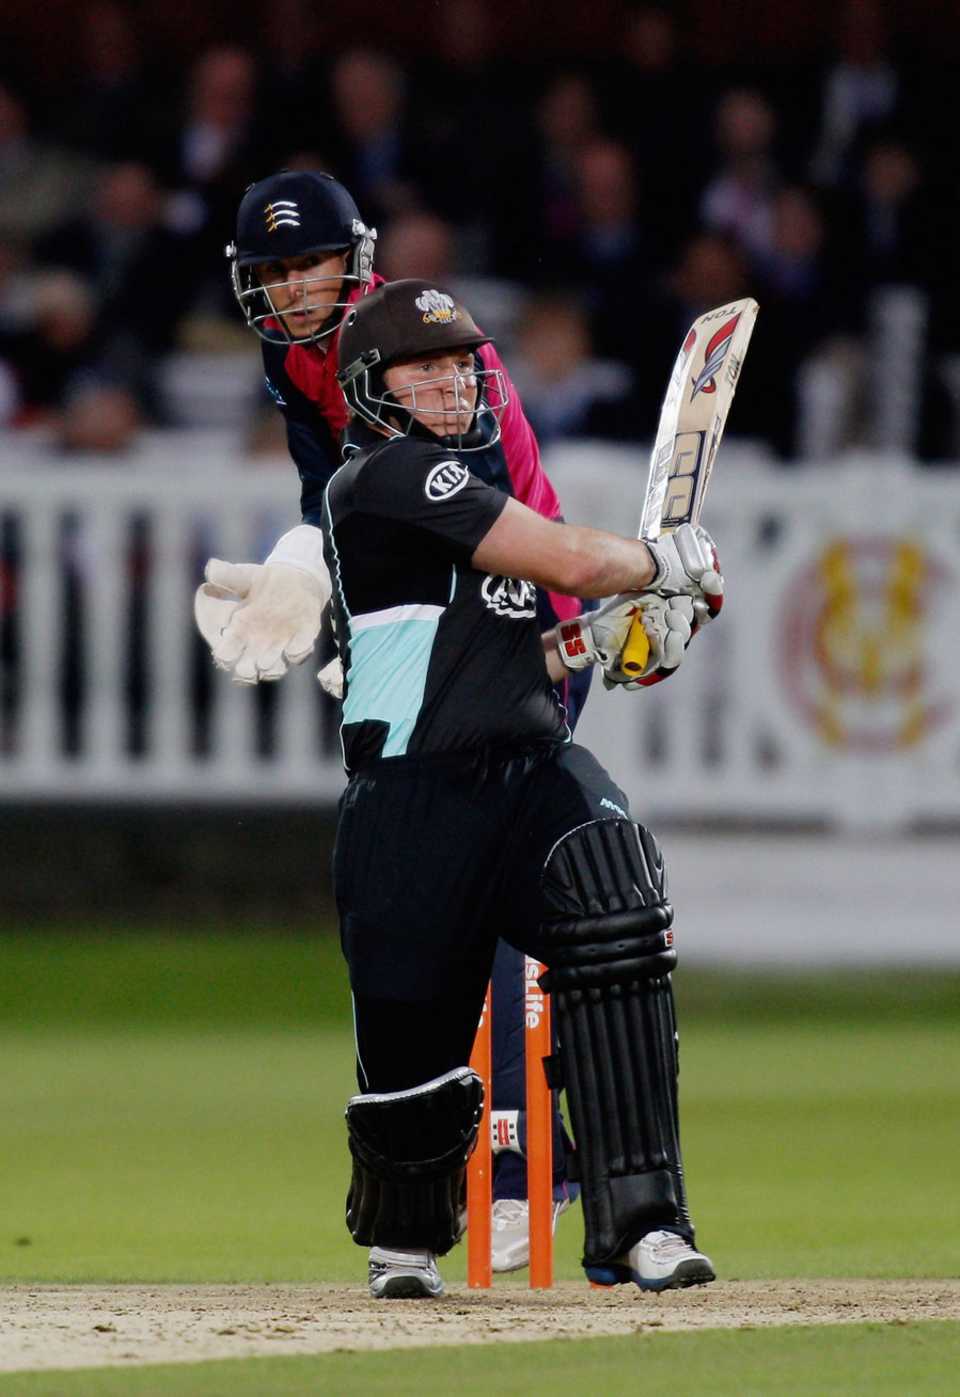 Gary Wilson's half-century helped Surrey to victory, Middlesex Surrey, FLt20 South Group, Lord's, June 14, 2012